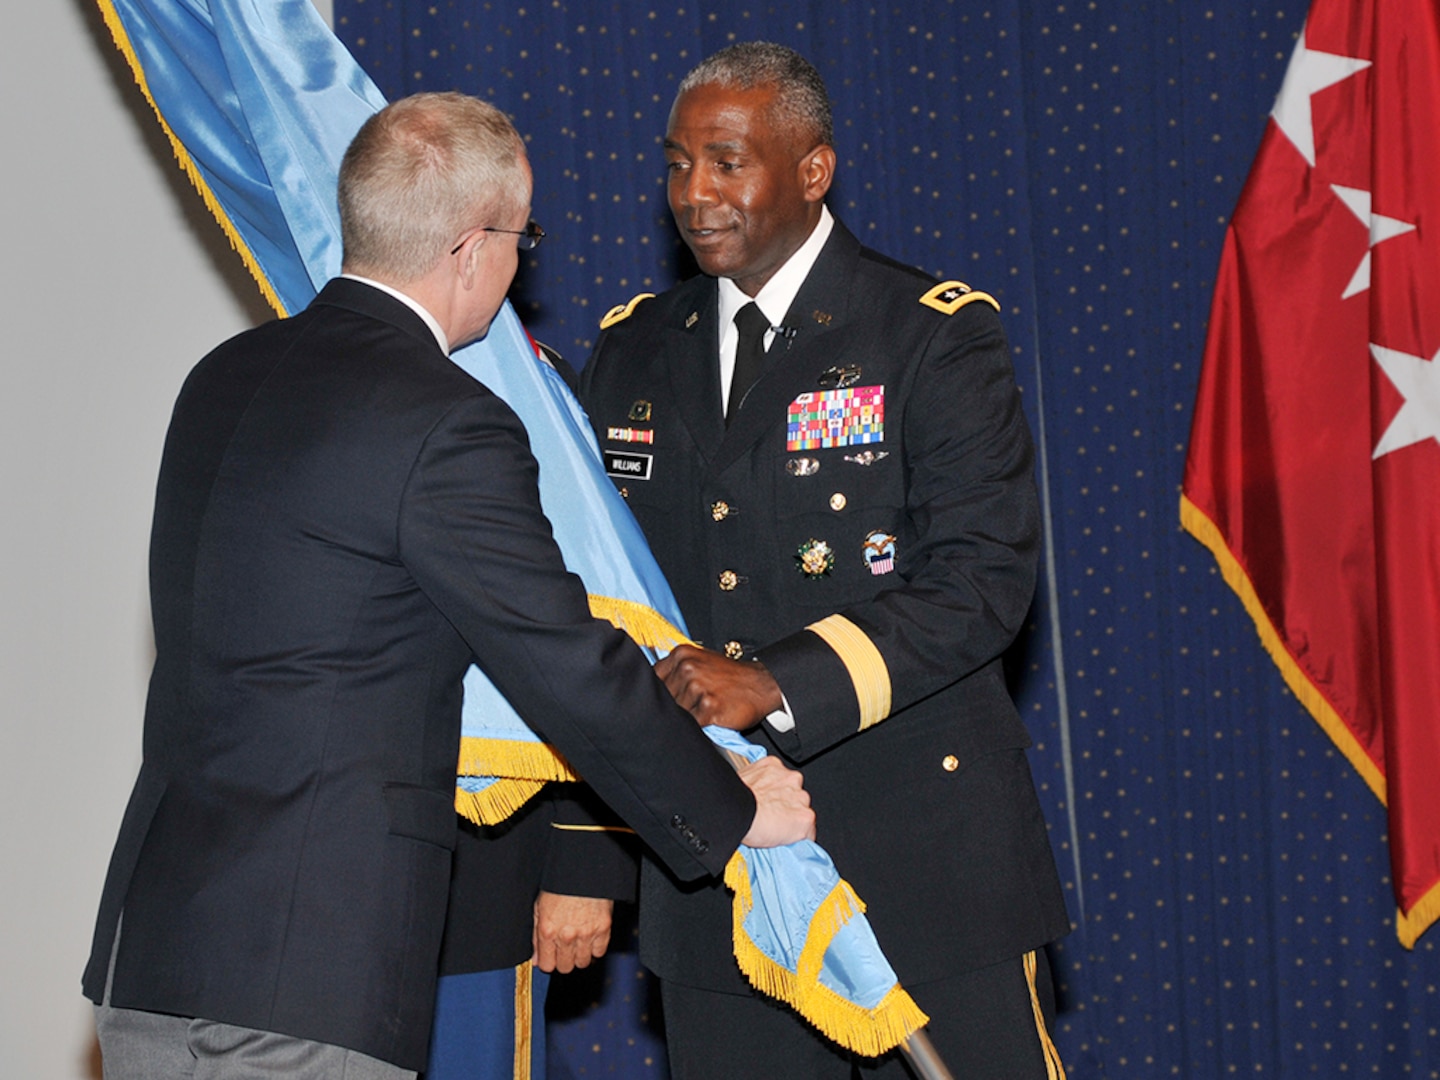 James MacStravic, performing the duties of the under secretary of defense for acquisition, technology and logistics, passes the Defense Logistics Agency command flag to the agency's new director, Army Lt. Gen. Darrell Williams.